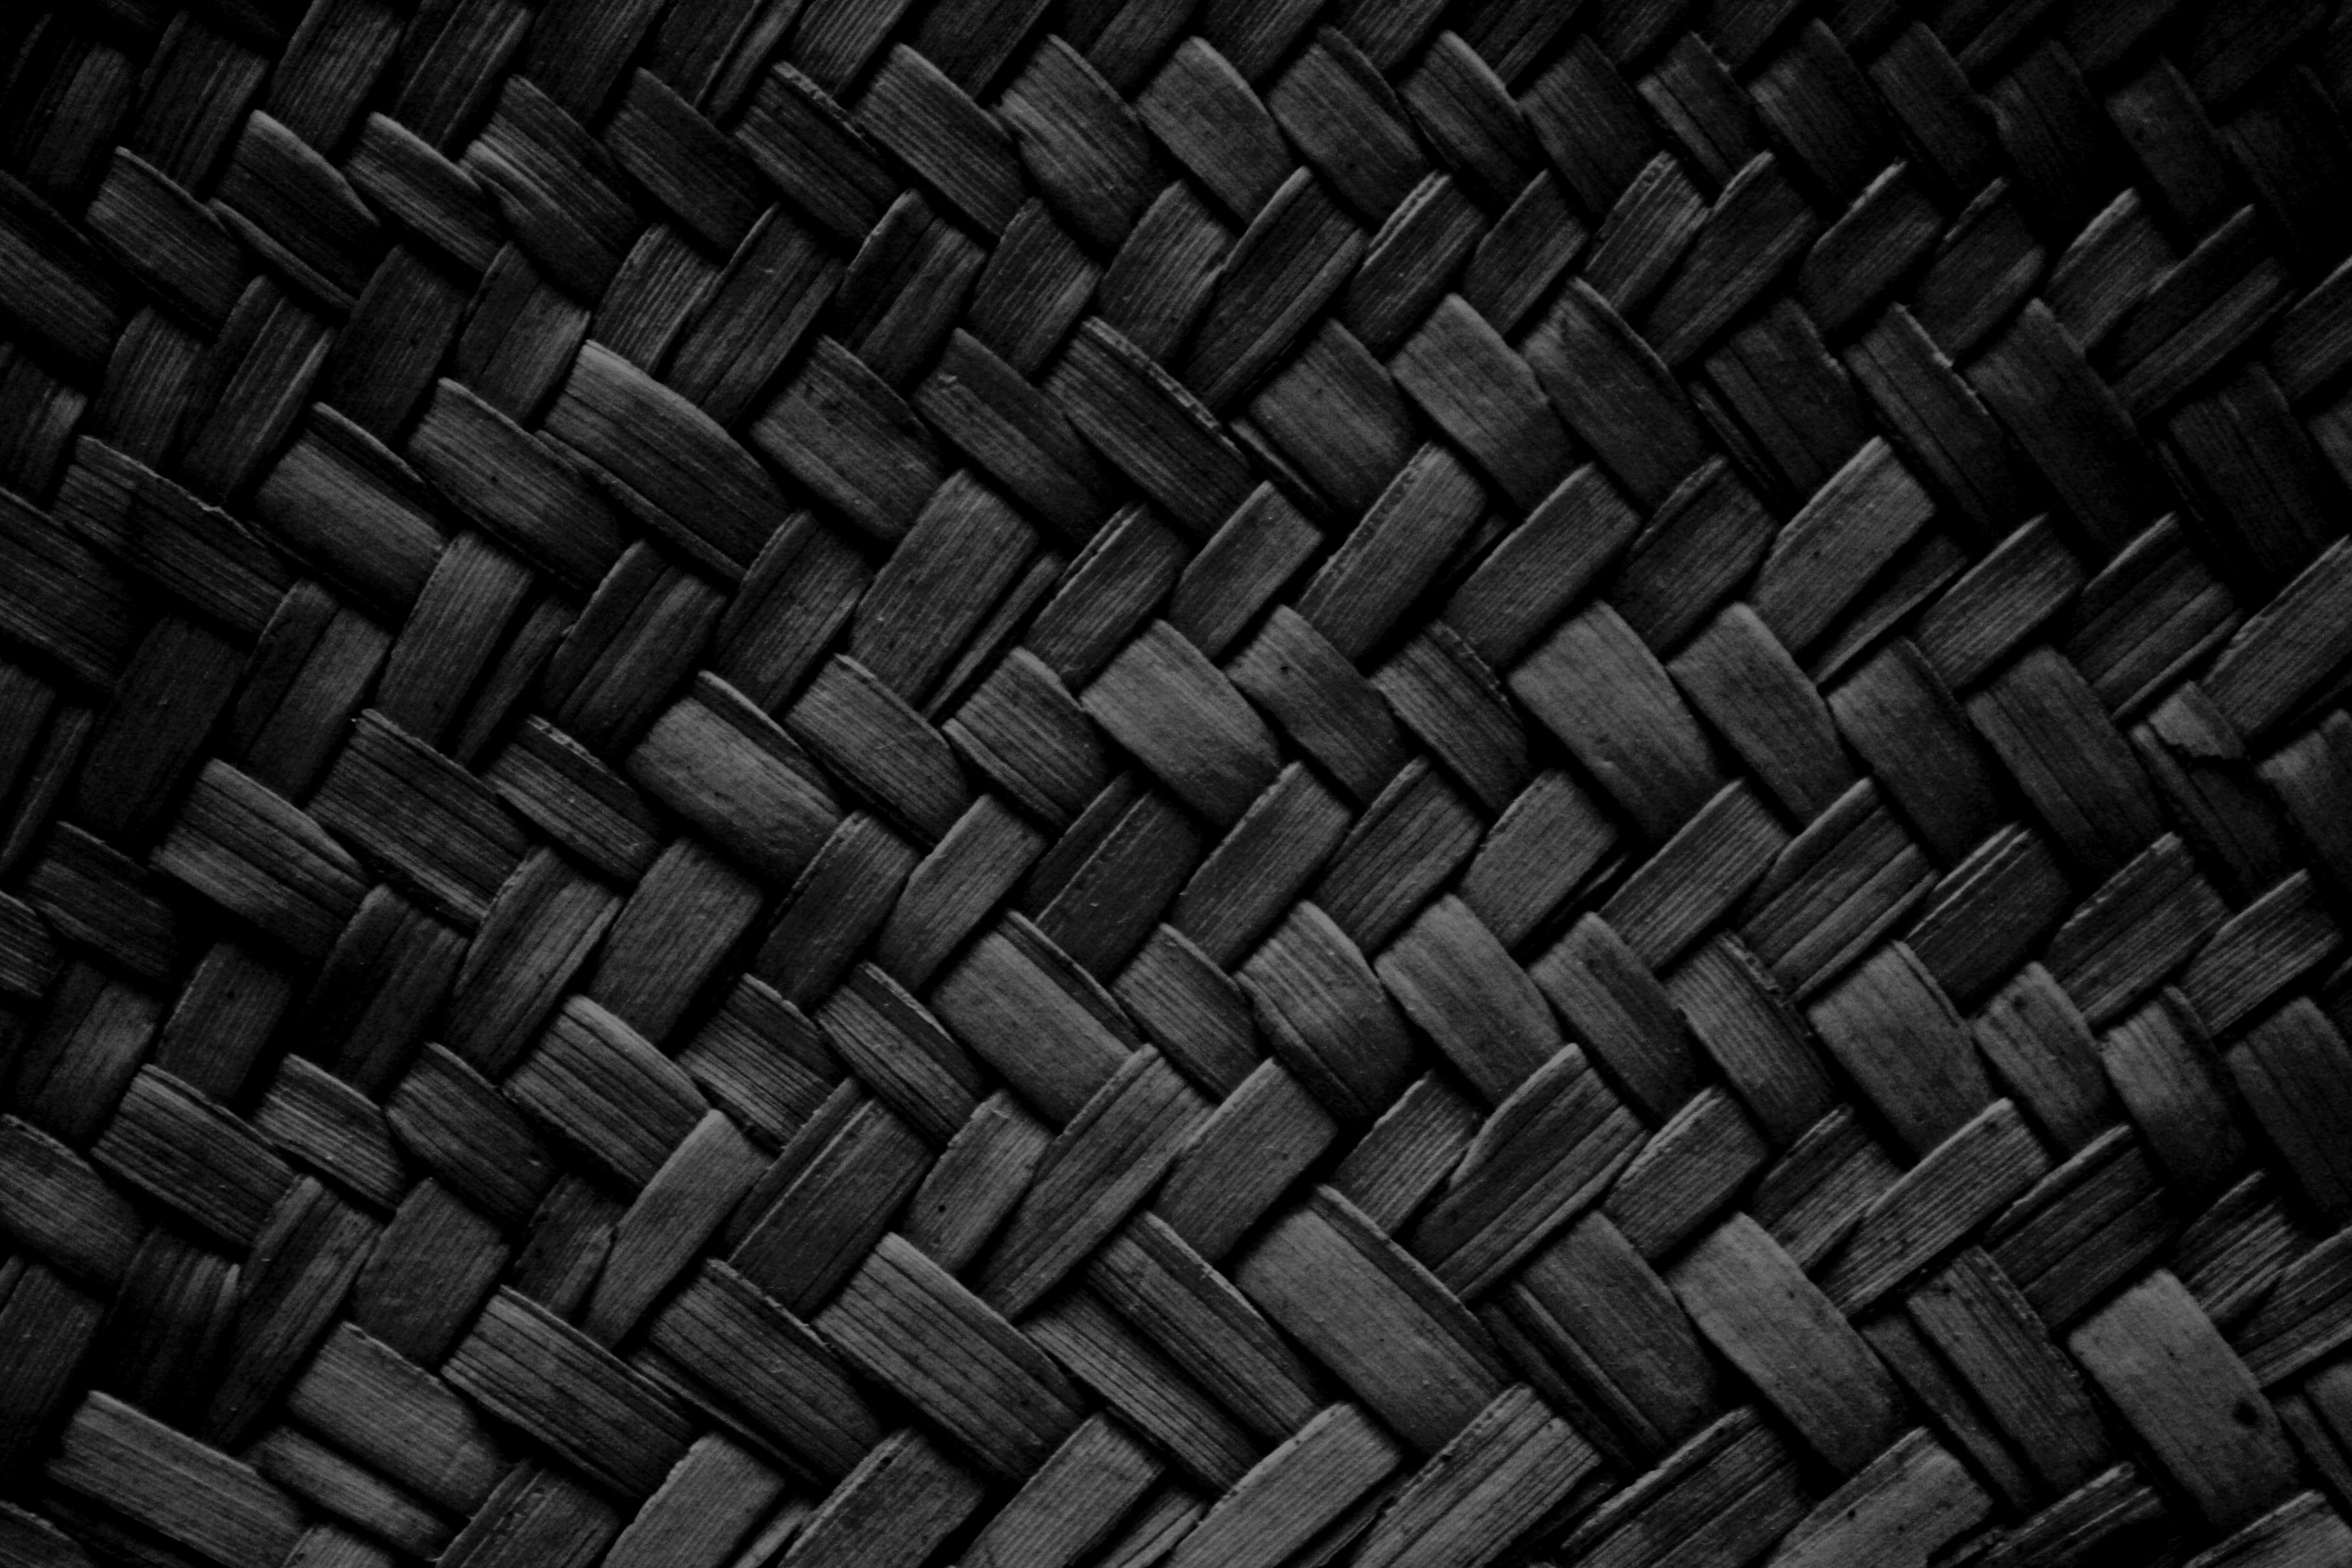 Black Woven Straw Texture Picture | Free Photograph ...
